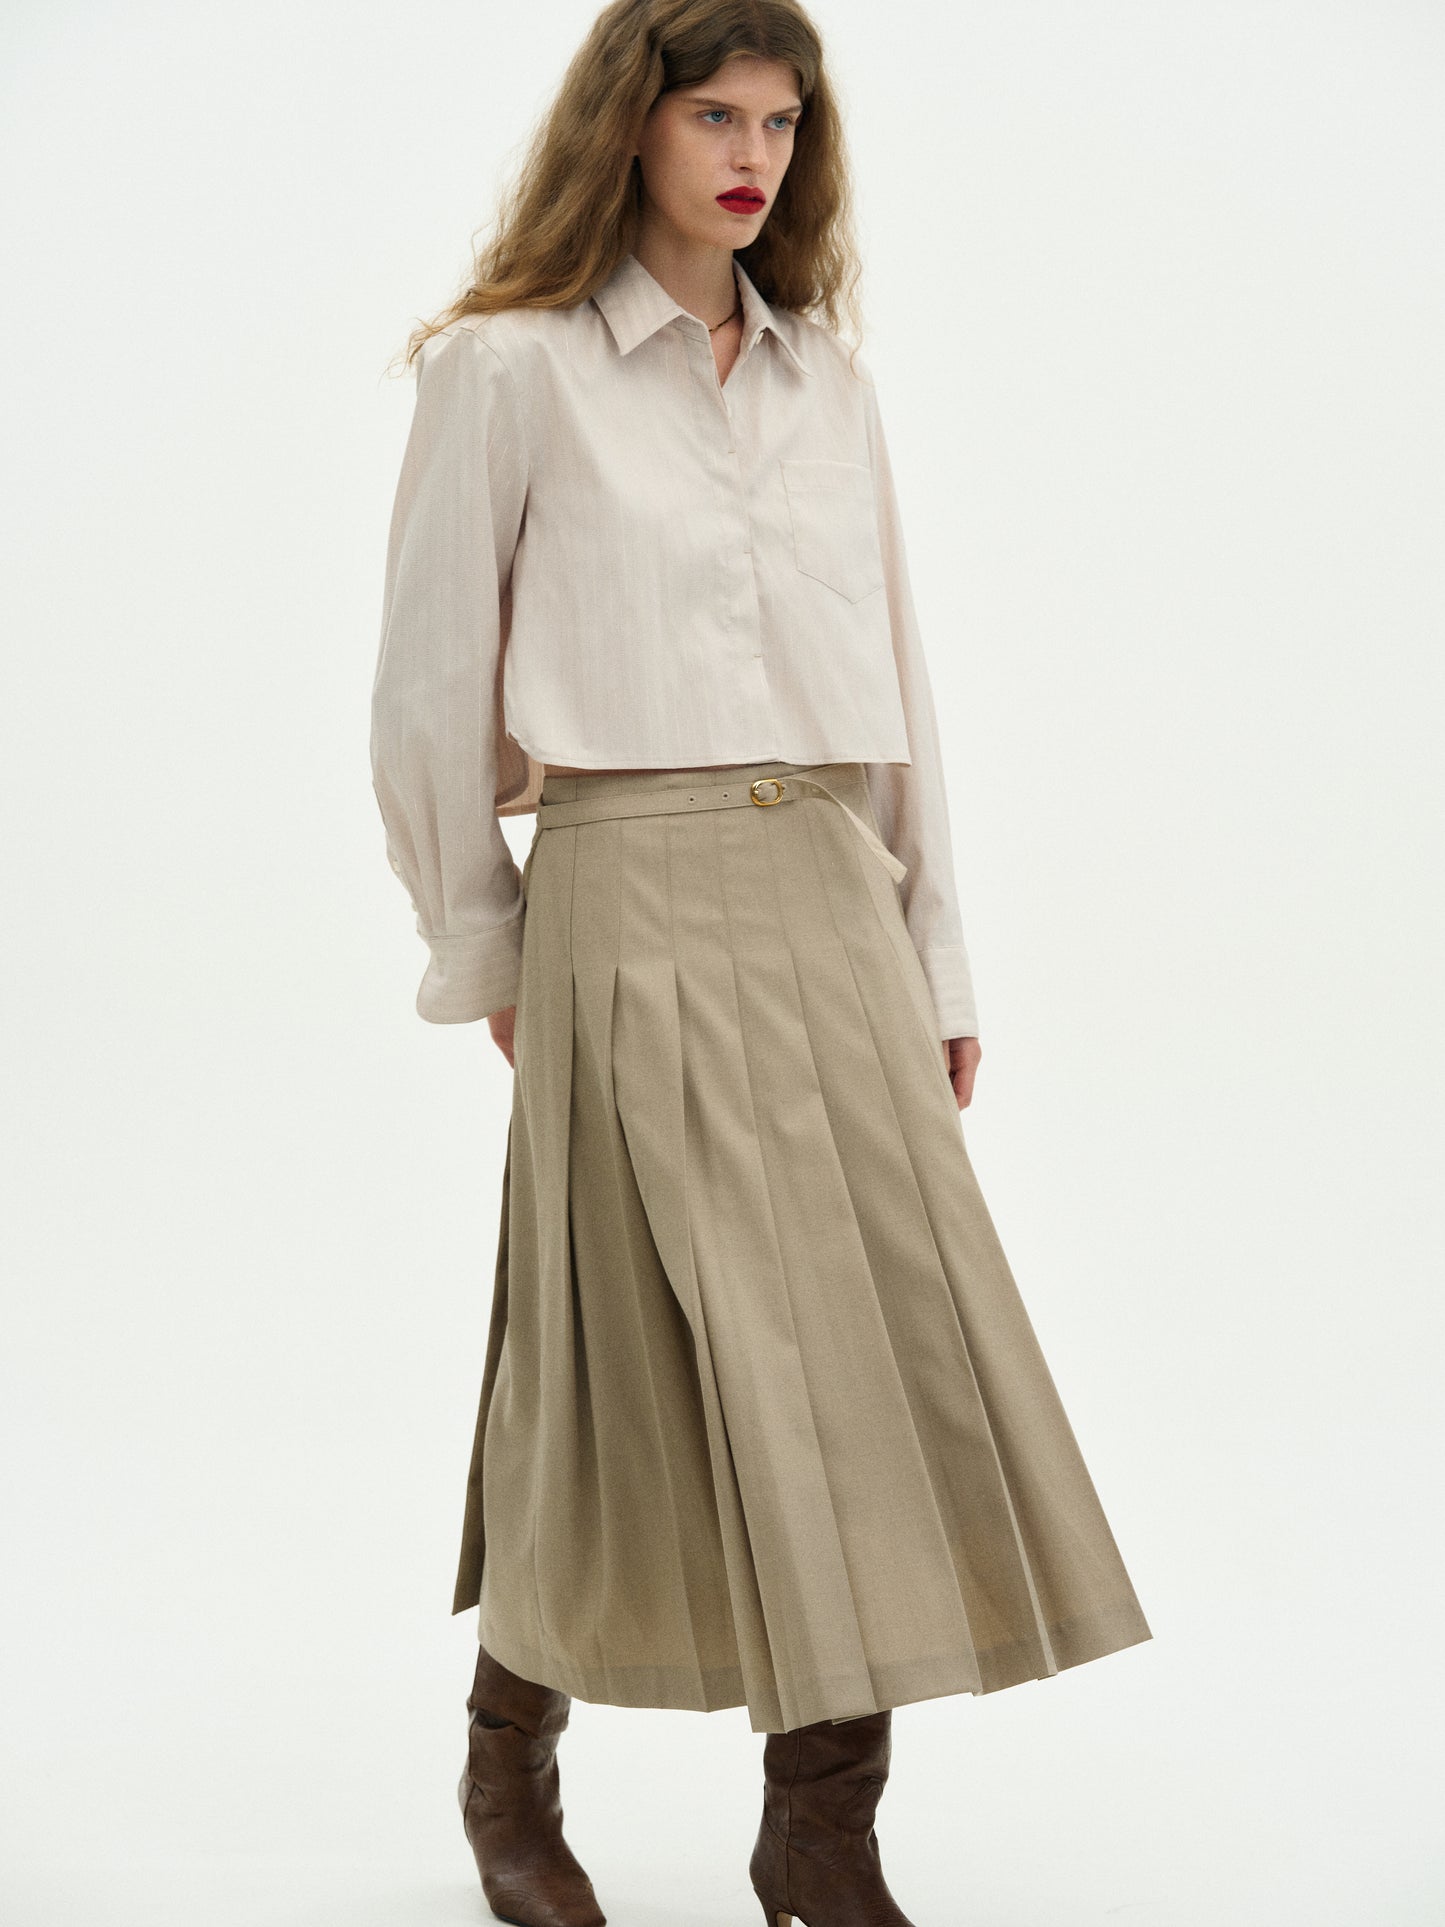 Buckle Pleated Skirt, Sandstone – SourceUnknown